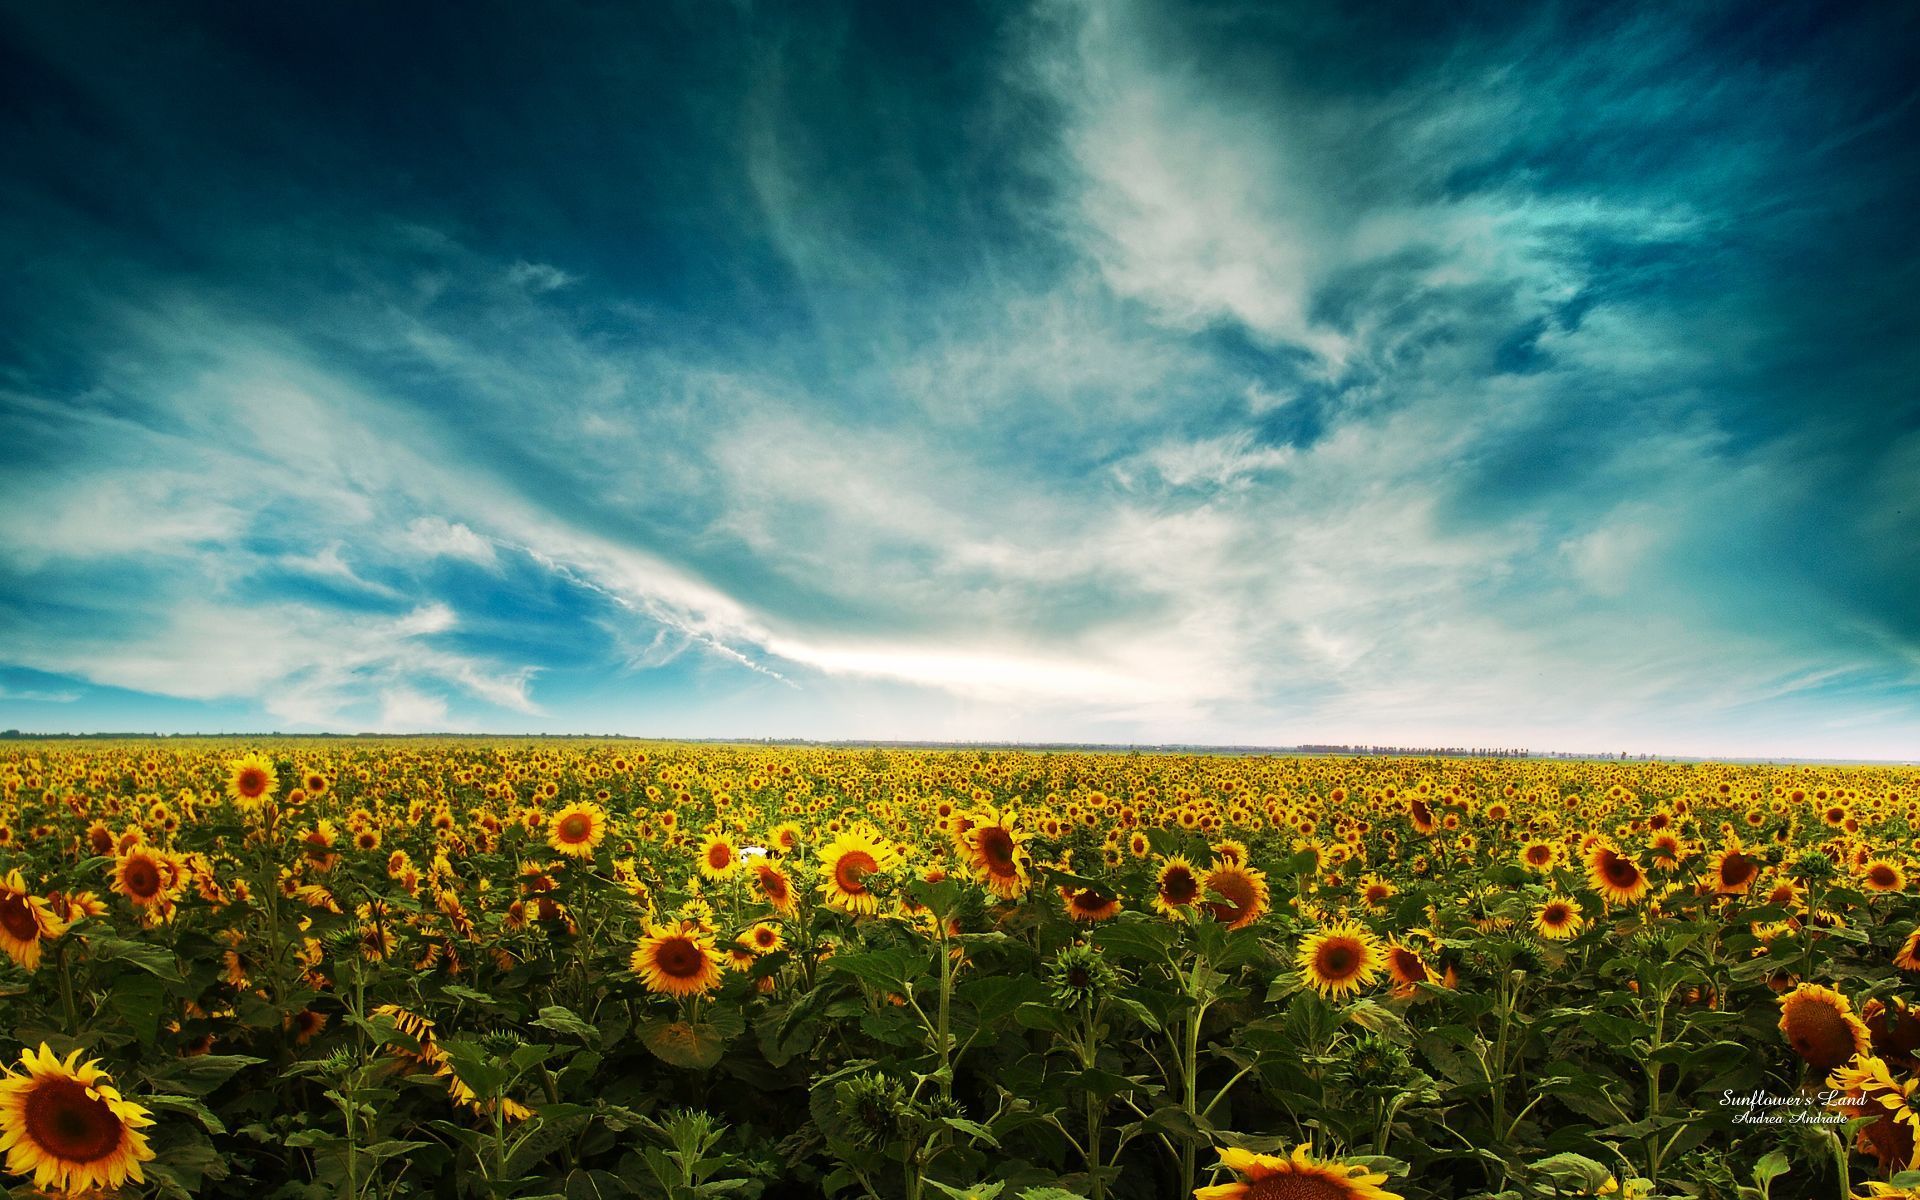 Wallpapers Tagged With SUNFLOWERS | SUNFLOWERS HD Wallpapers | Page 1